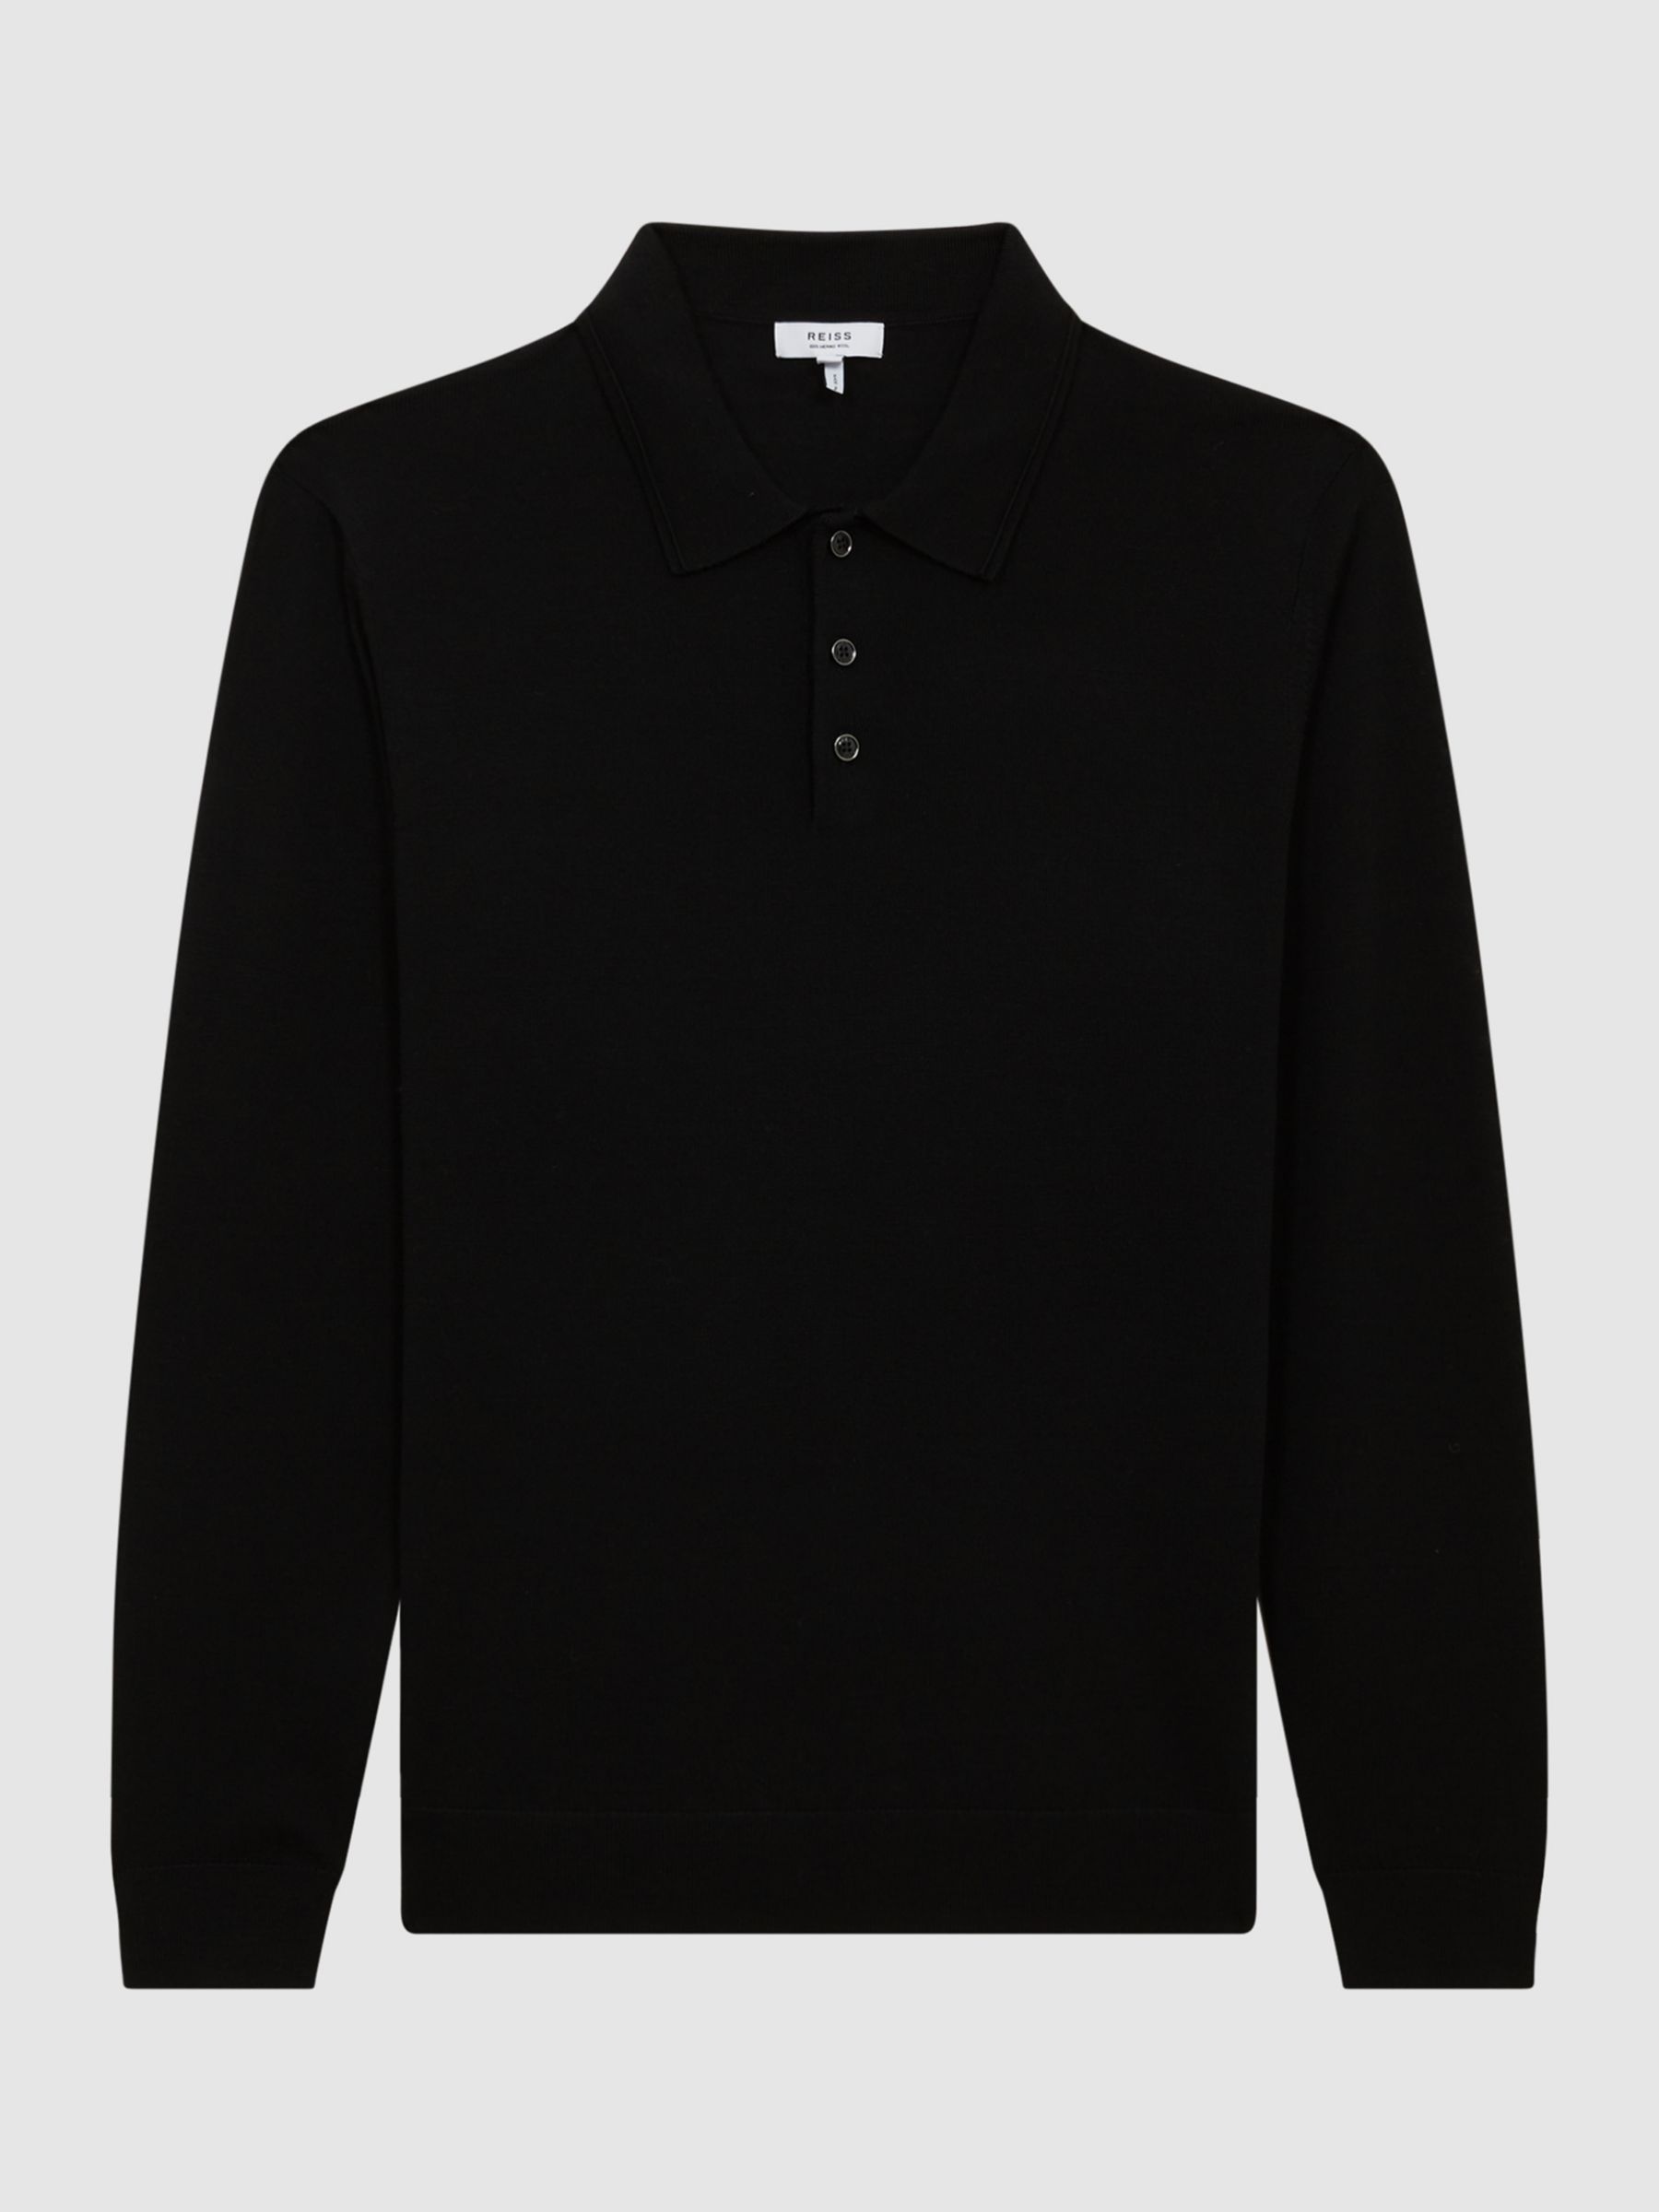 Reiss Trafford Knitted Wool Long Sleeve Polo Top, Black, XS